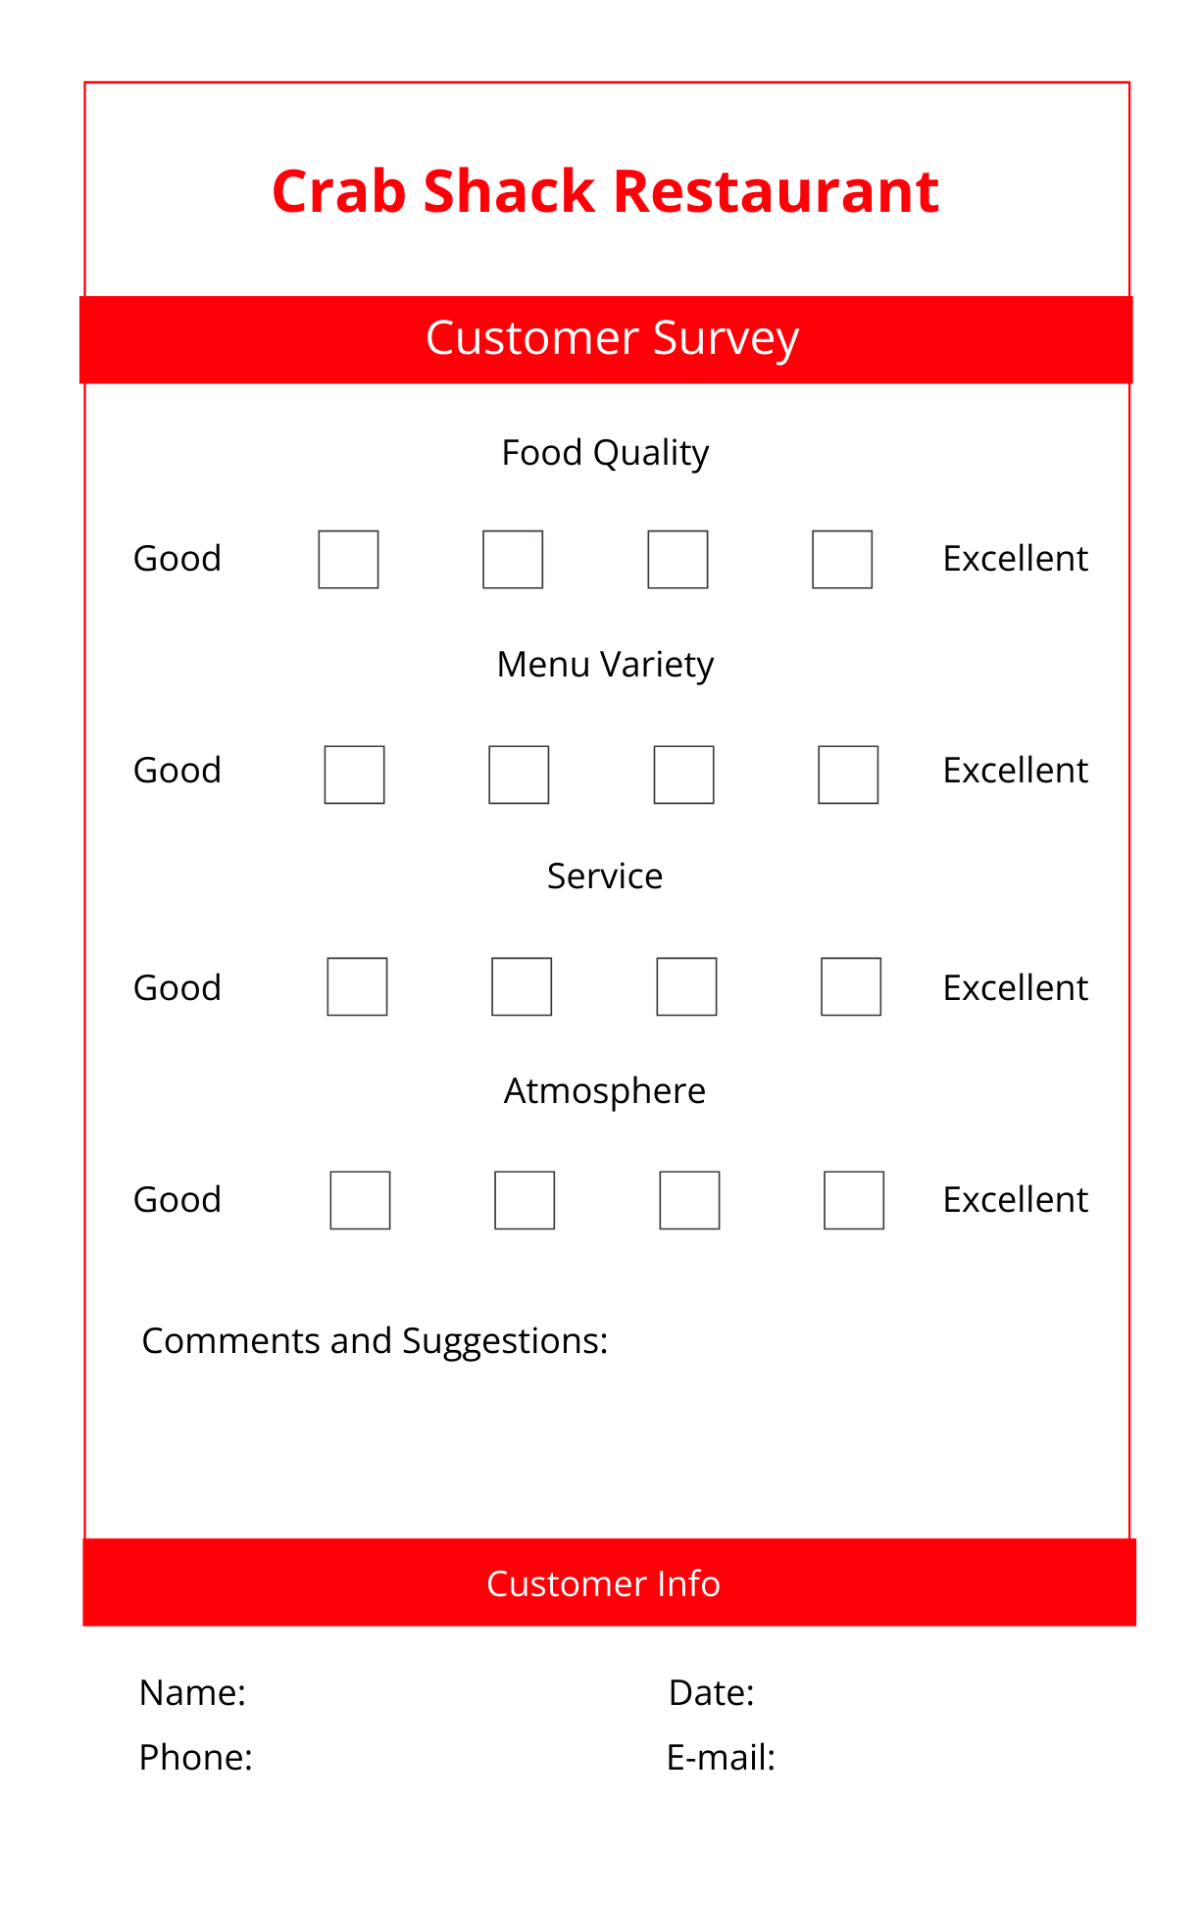 Free Comment Card Template